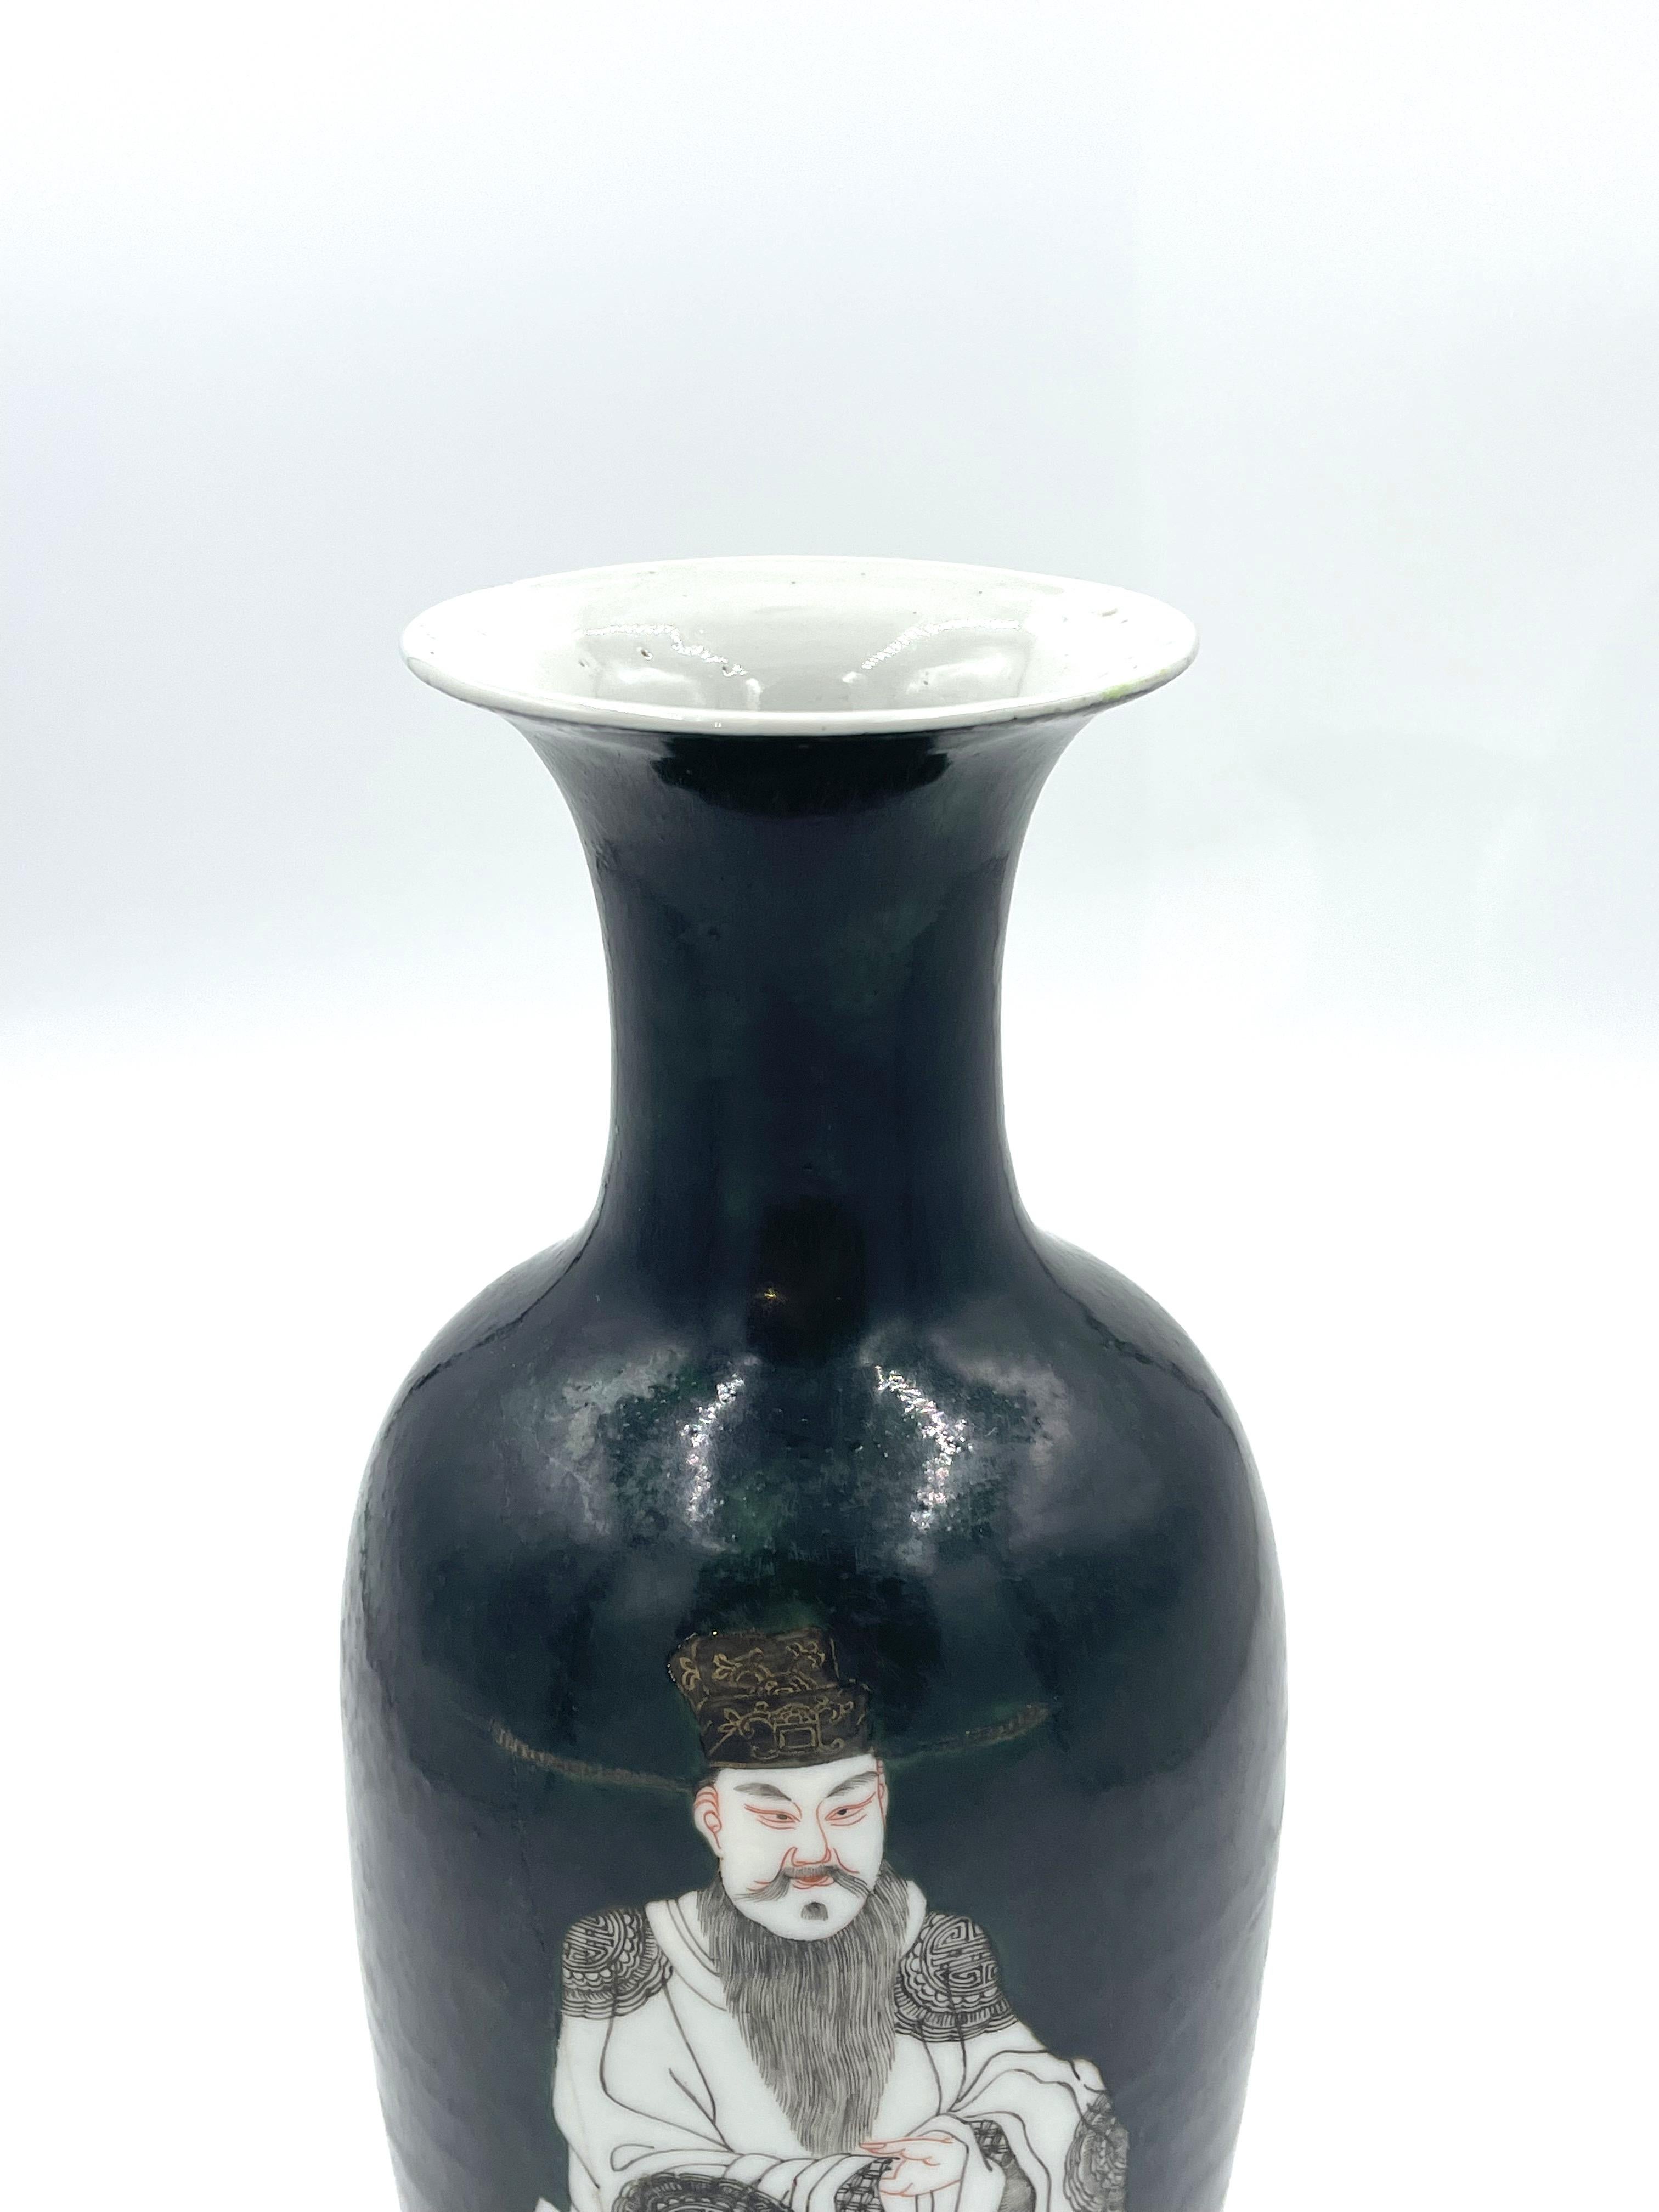 Glazed Chinese Vase with Two Figures, Qing Emperor Kangxi Period